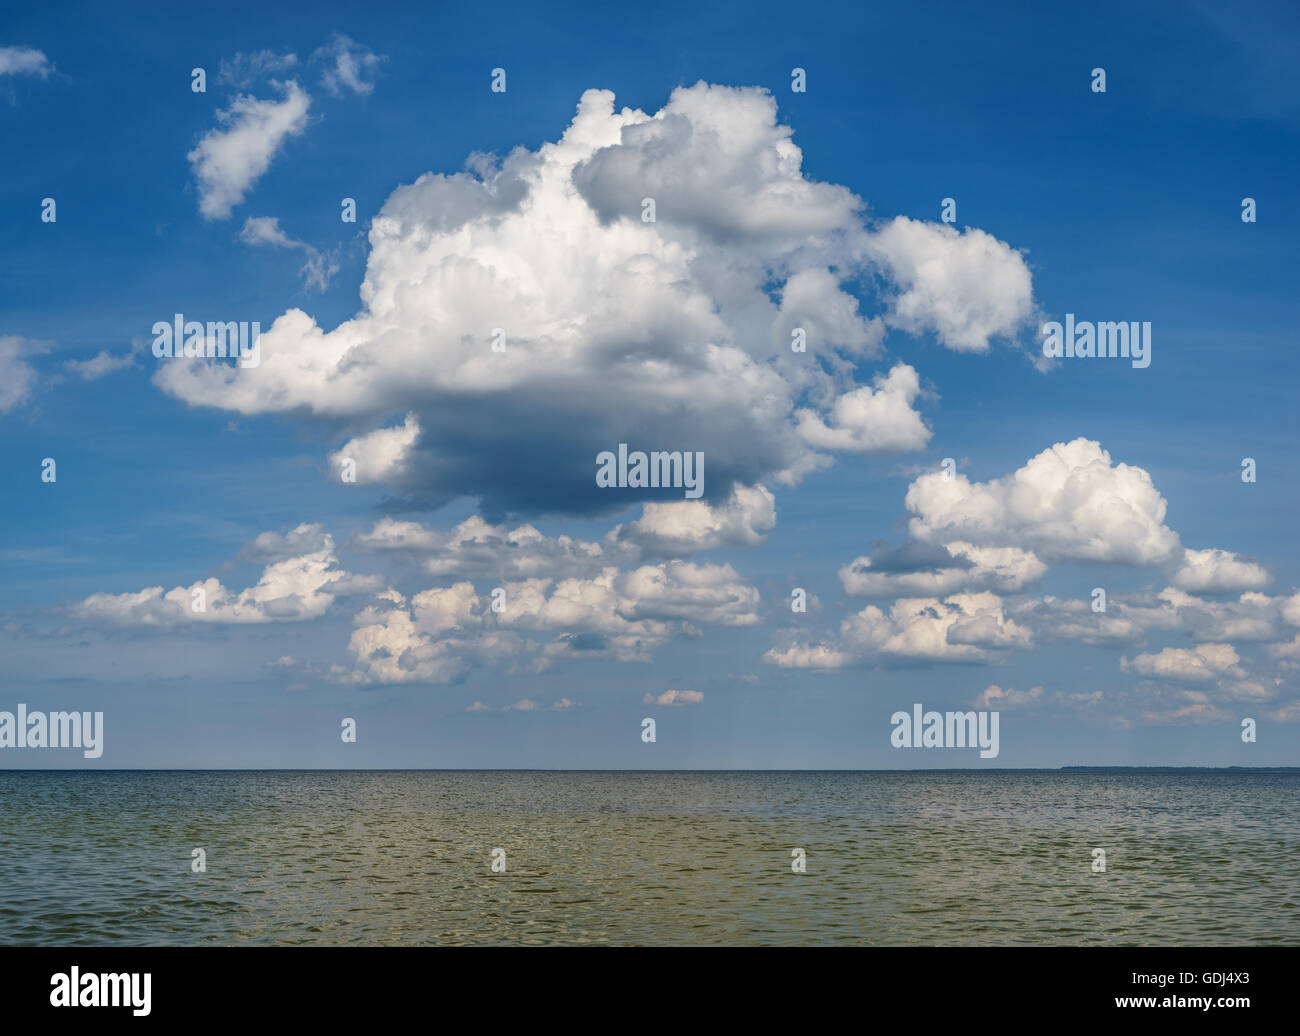 Open sea panorama with blue sky and scenic fluffy clouds Stock Photo